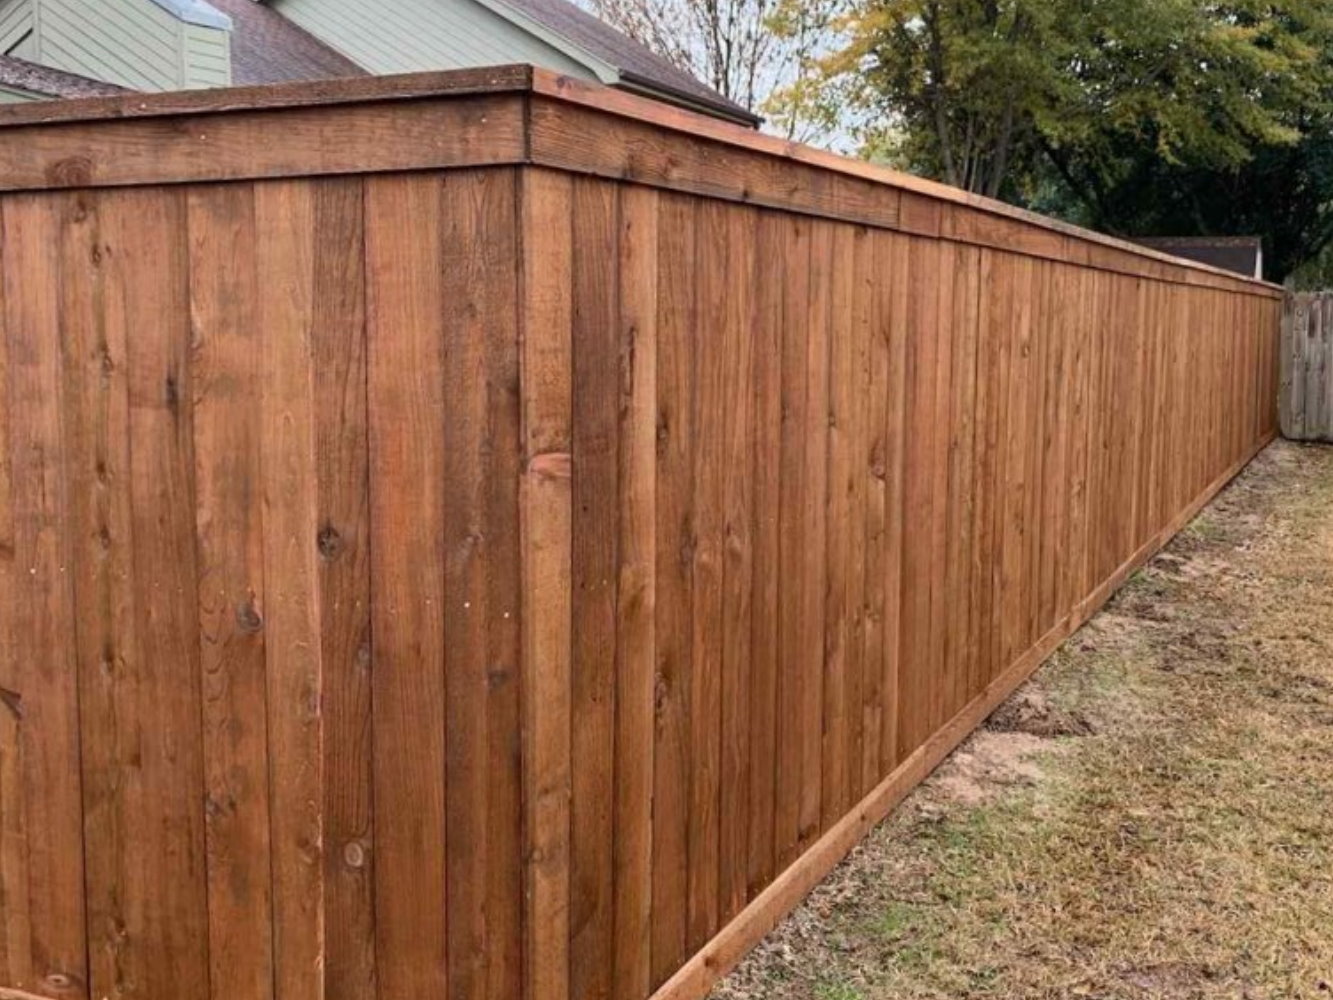 Leary TX cap and trim style wood fence